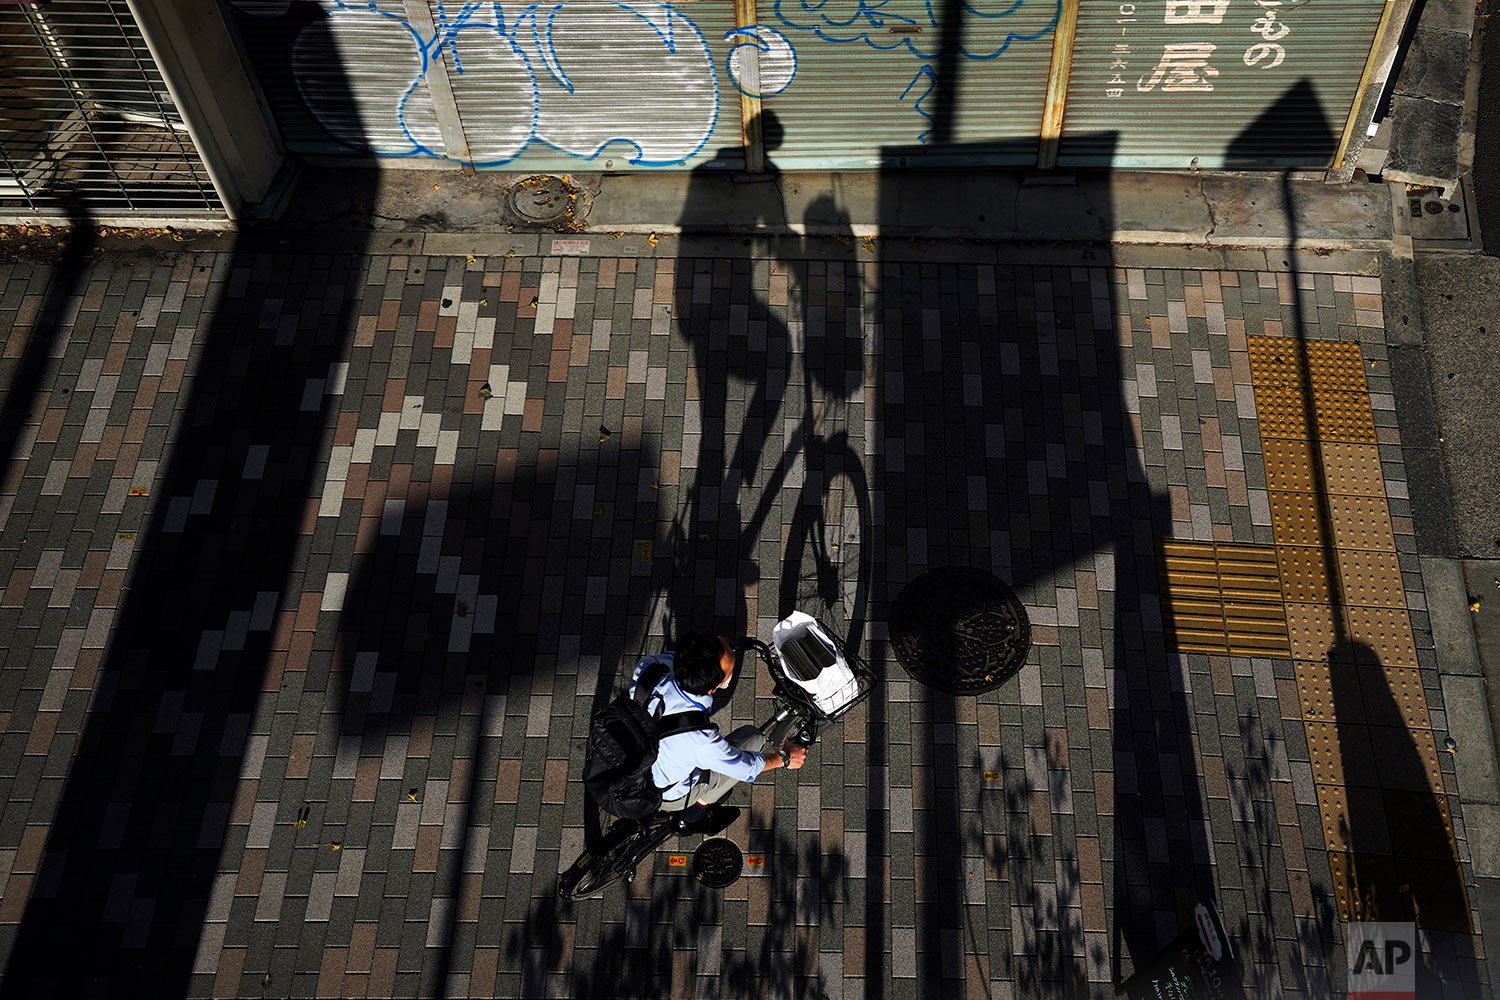  A long shadow from a bicyclist wearing a protective mask is cast on a sidewalk Monday, Oct. 11, 2021 in Tokyo. (AP Photo/Kiichiro Sato) 